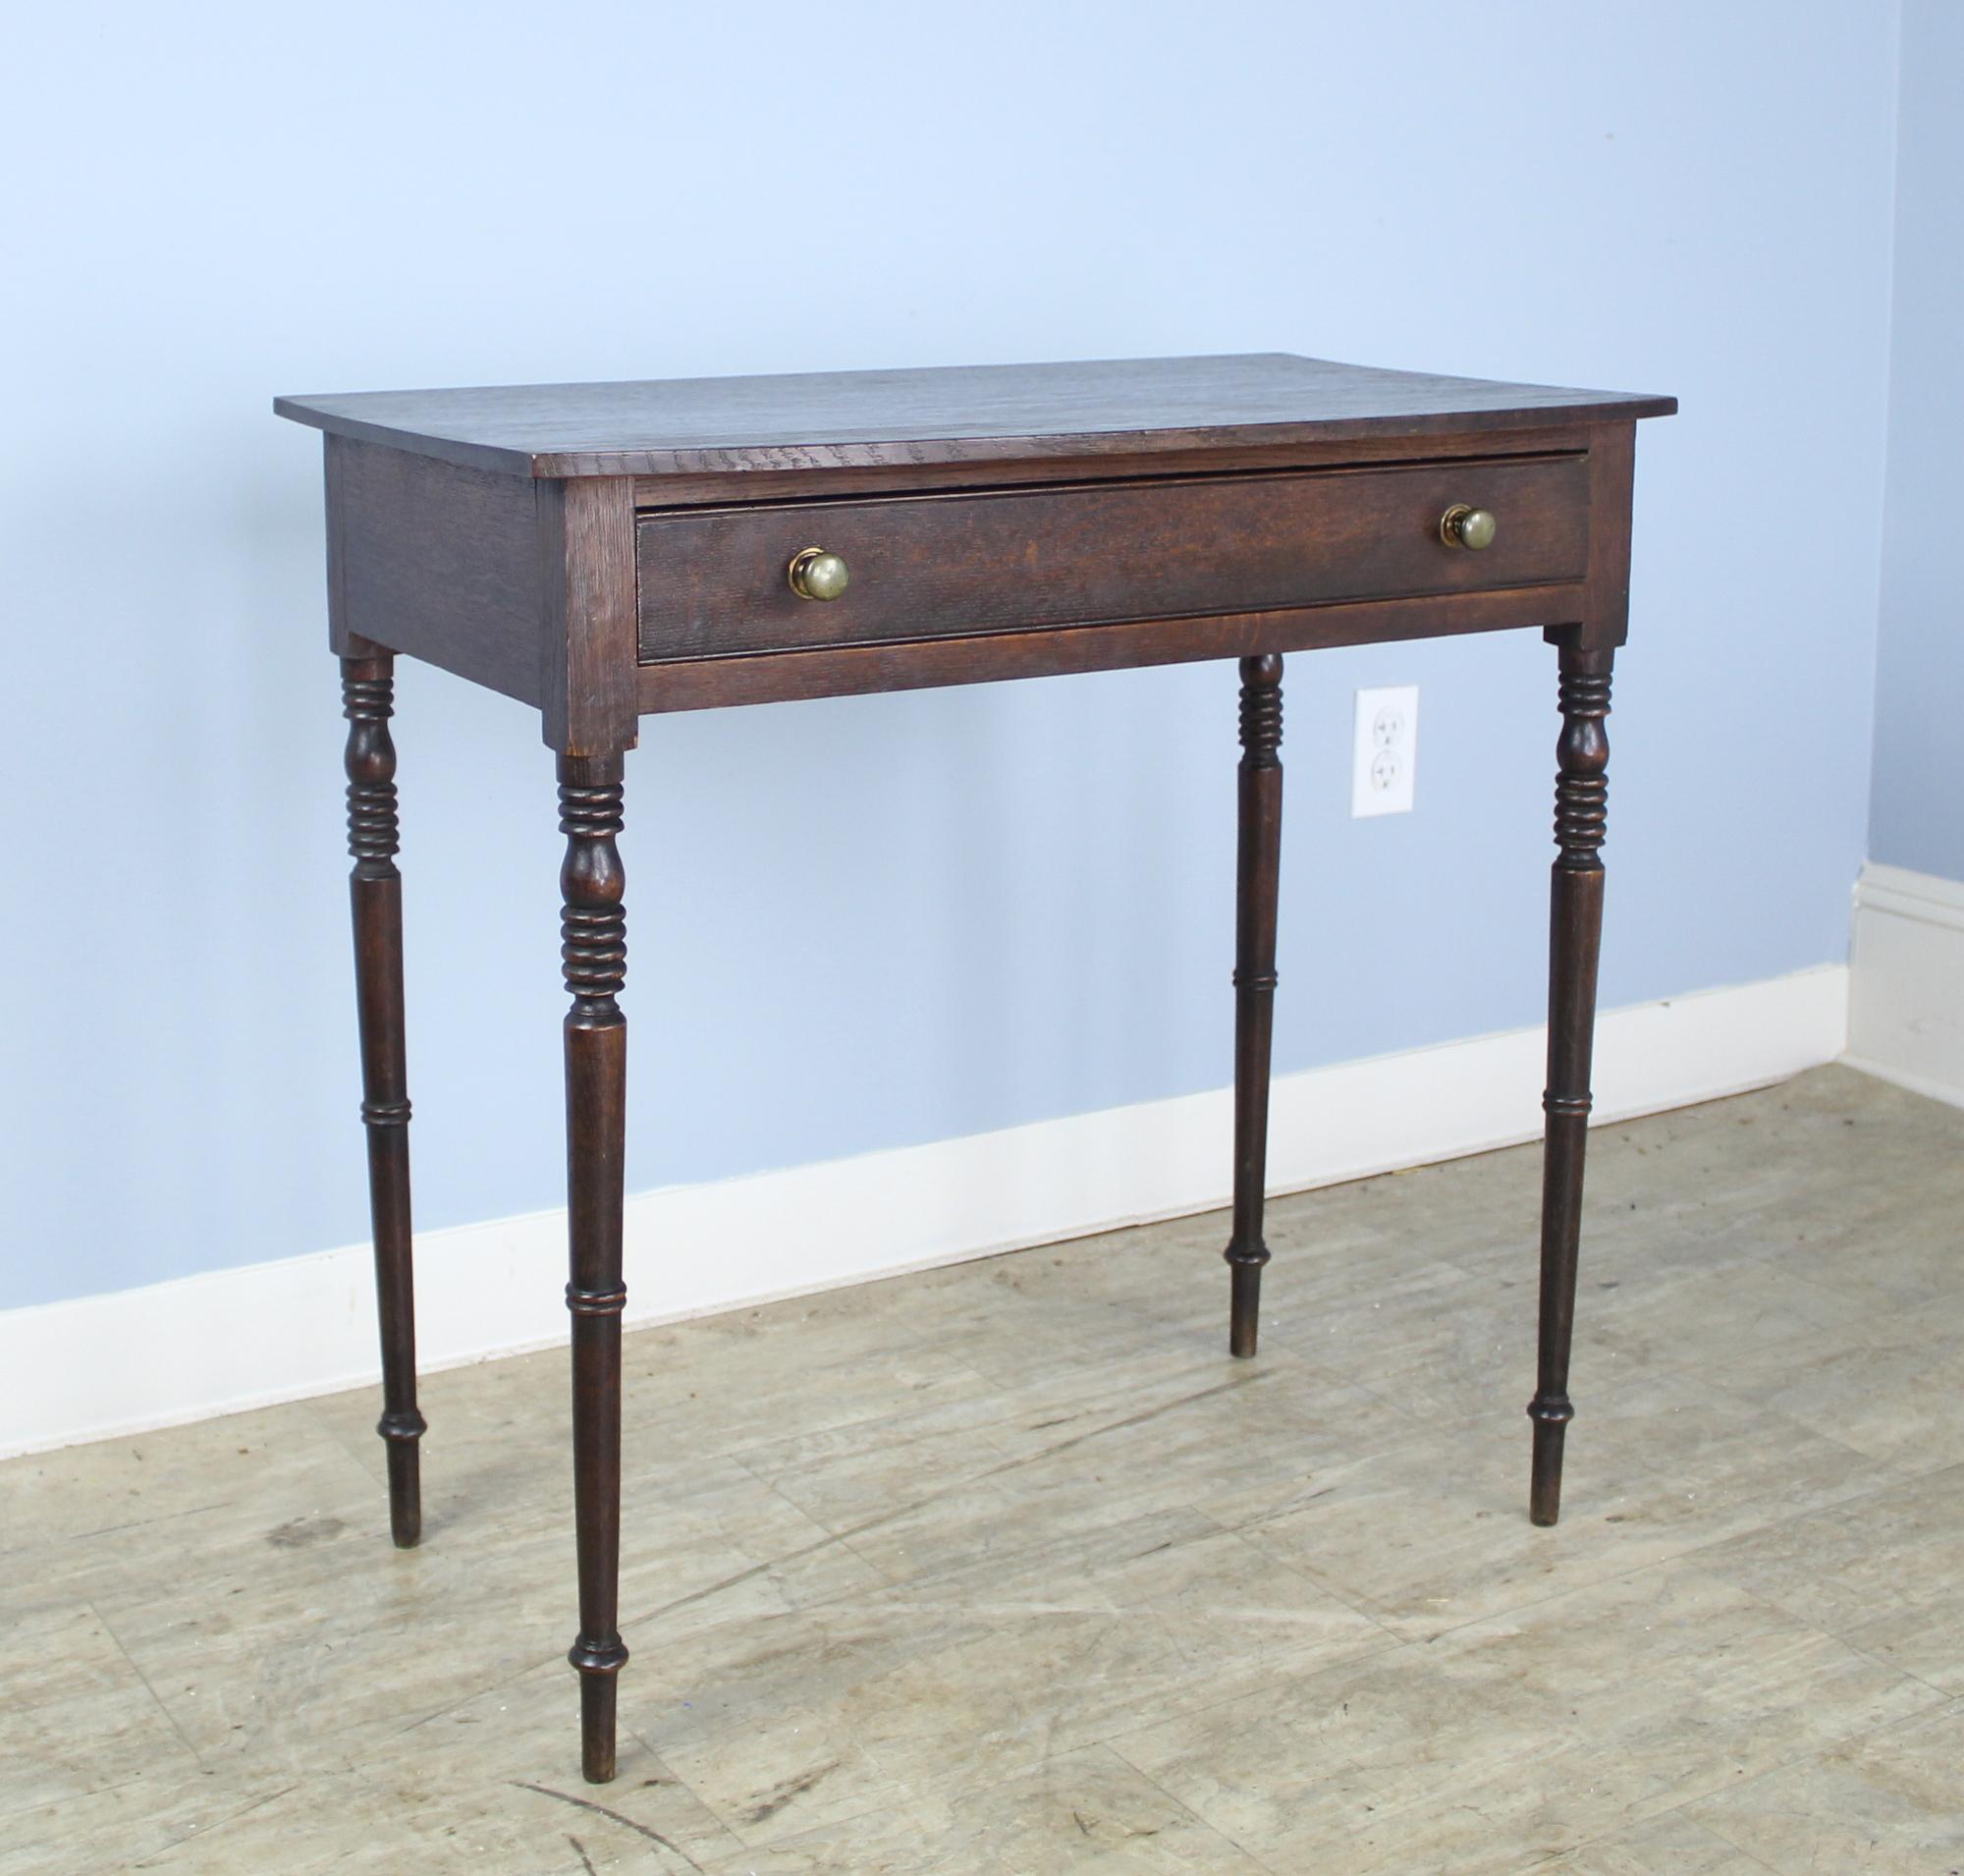 A graceful Regency side table with a bowed top and lovely thin turned legs in dark oak. The piece is in very good condition for it's age. Top has been lightly refinished.